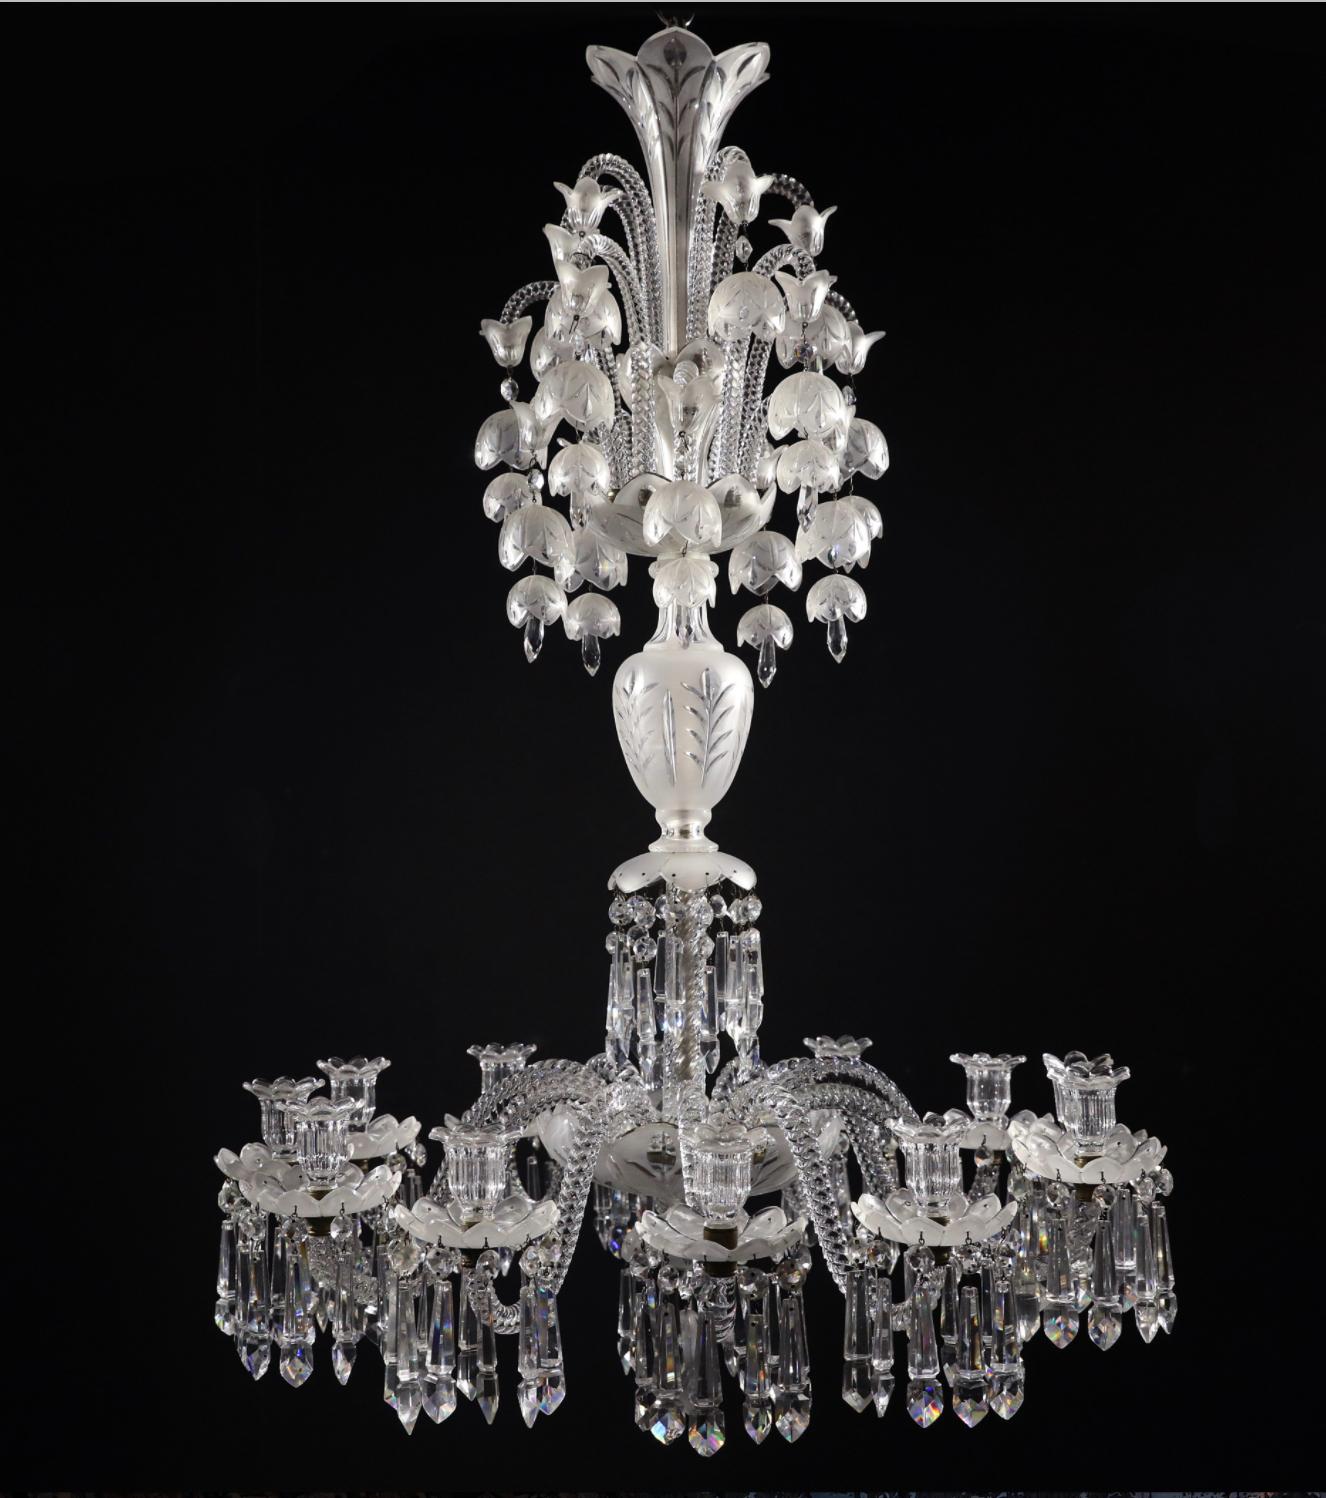 Late 19th century cut and moulded glass, 12 lights crystal chandelier by Baccarat, France.  Dimensions: Height 44